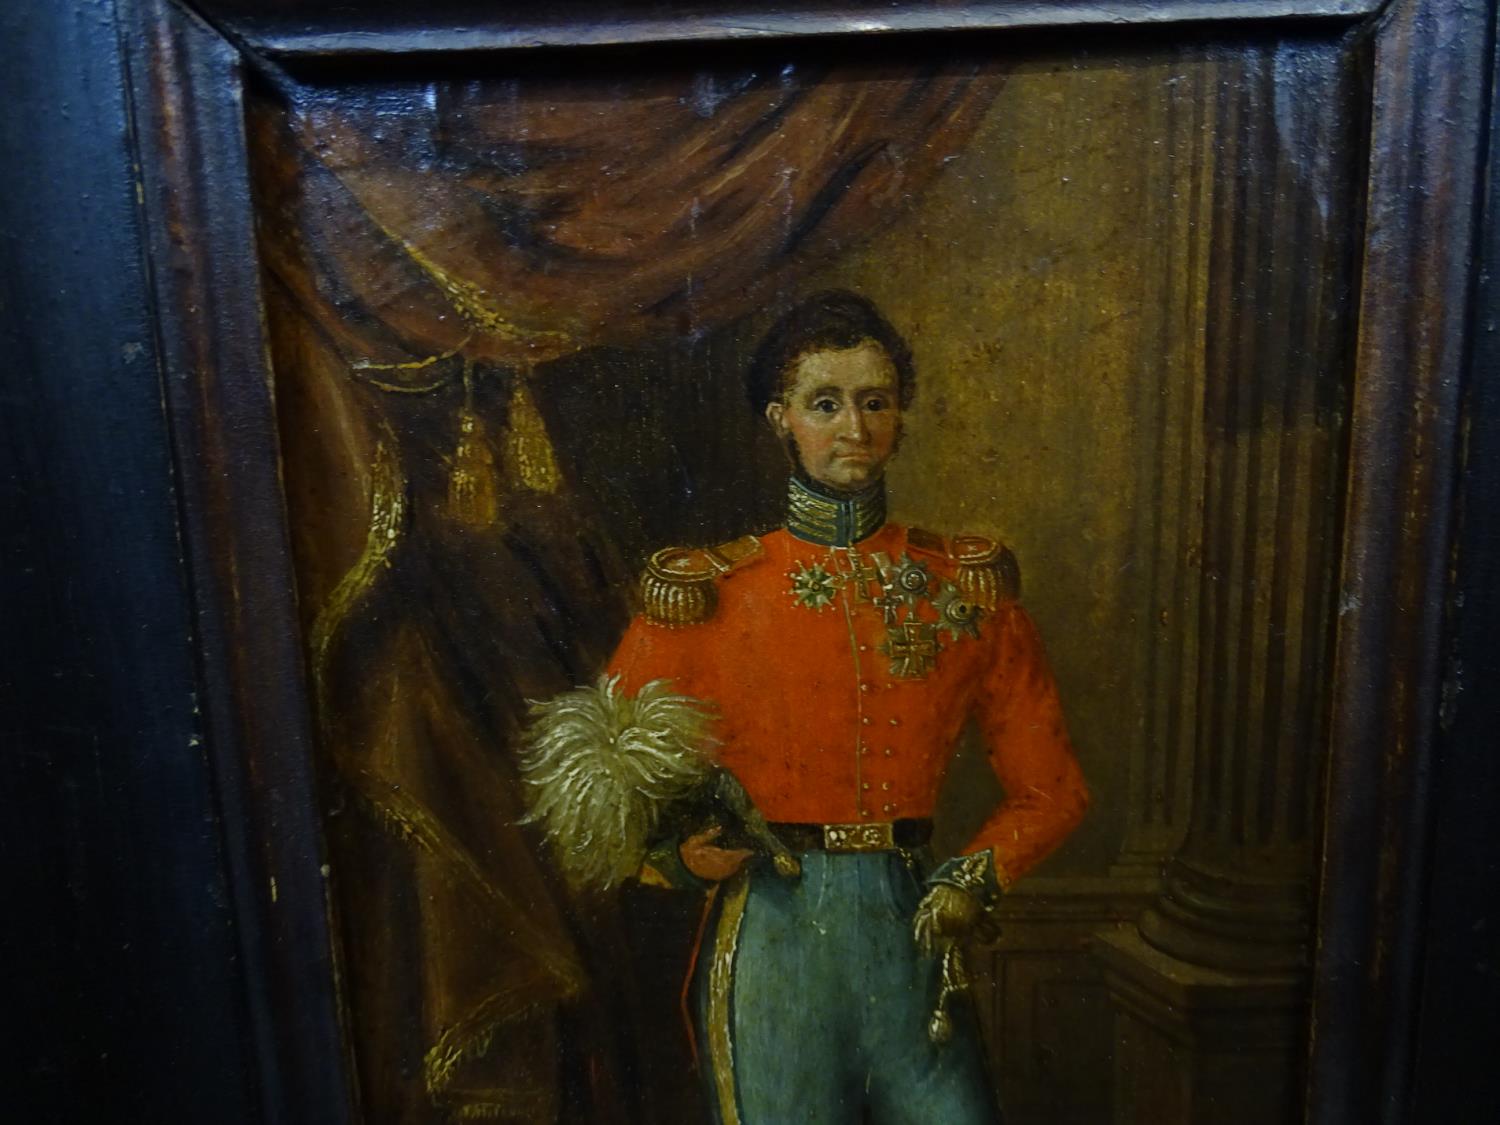 XIX Royal / Important German Nobility Oil on paper laid on panel, circa 1840 Portrait of Prince - Image 4 of 6